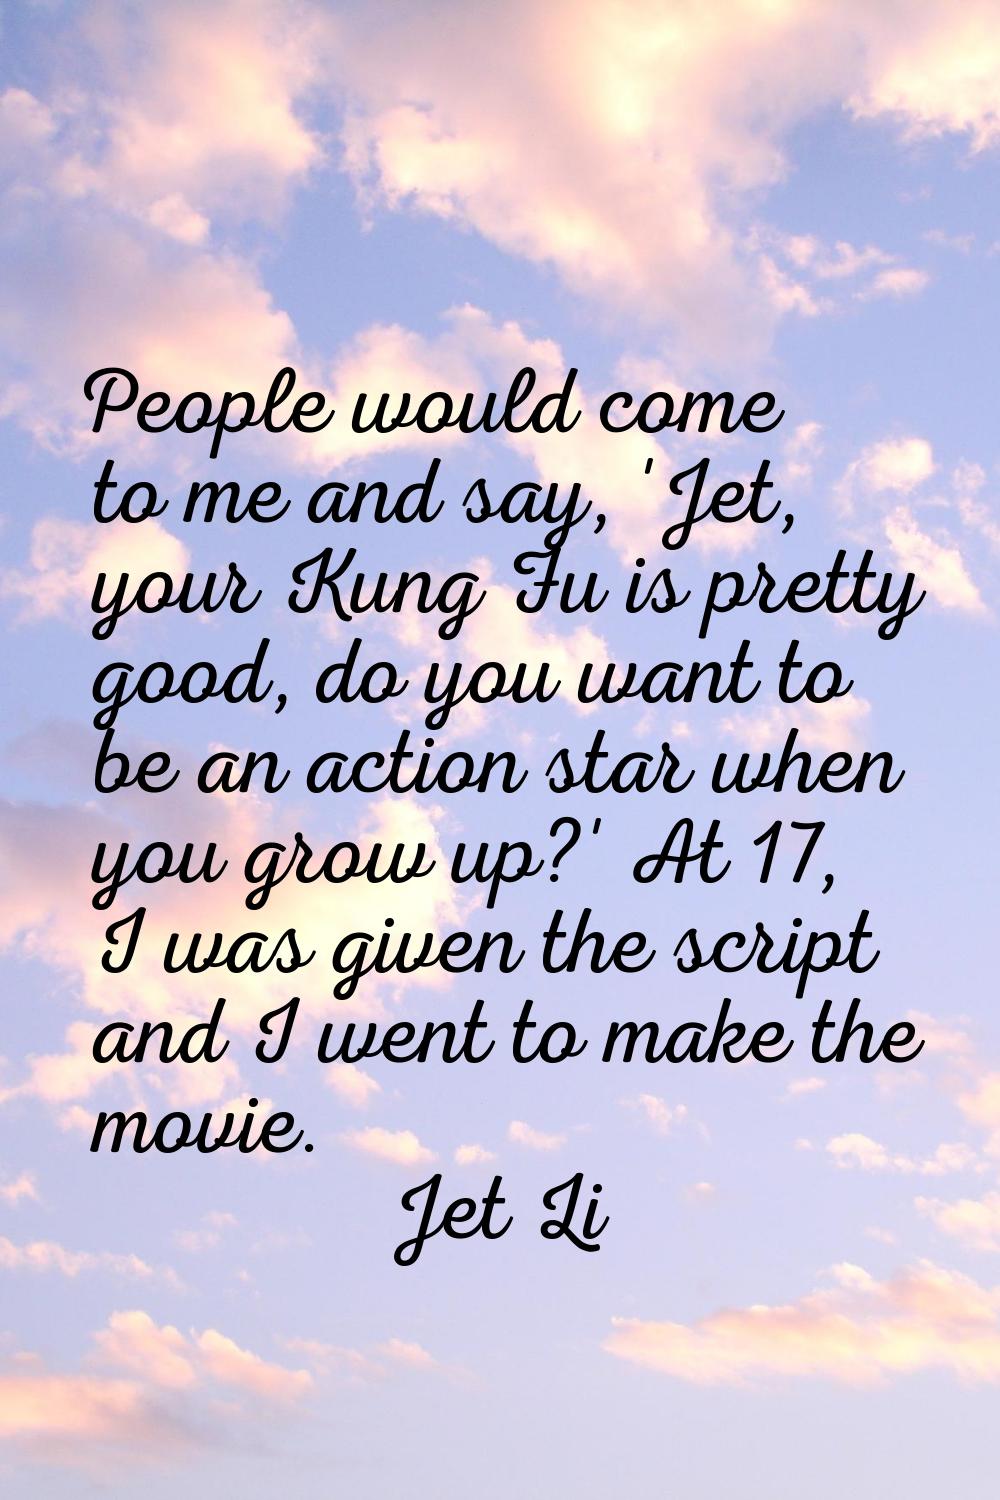 People would come to me and say, 'Jet, your Kung Fu is pretty good, do you want to be an action sta